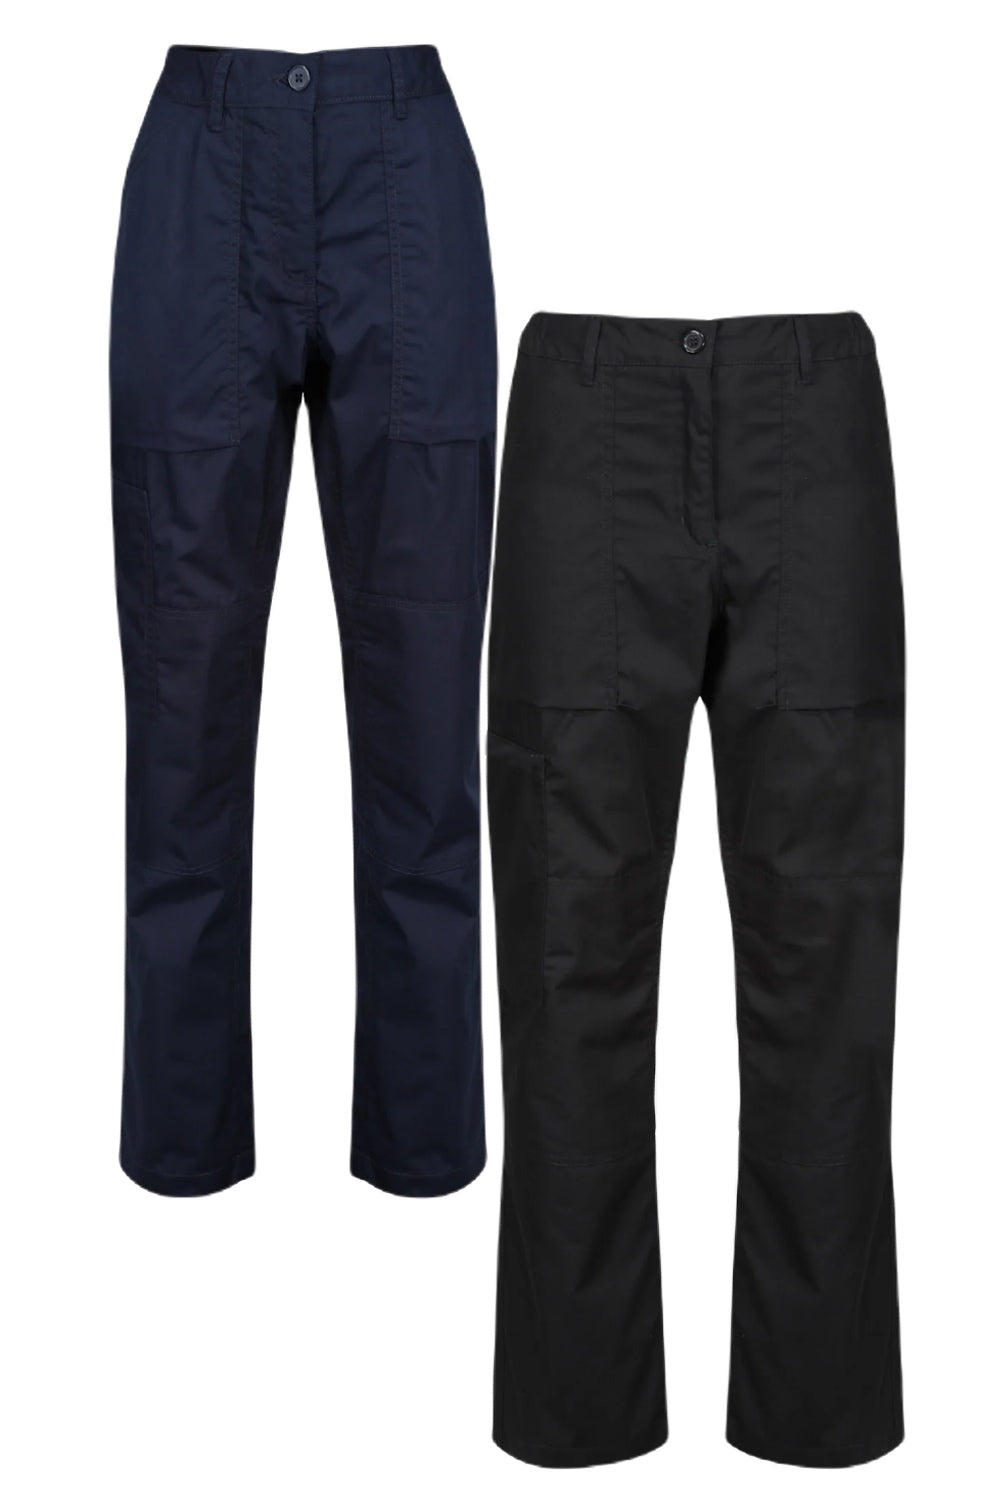 Regatta Womens New Action II Trousers in Navy and Black